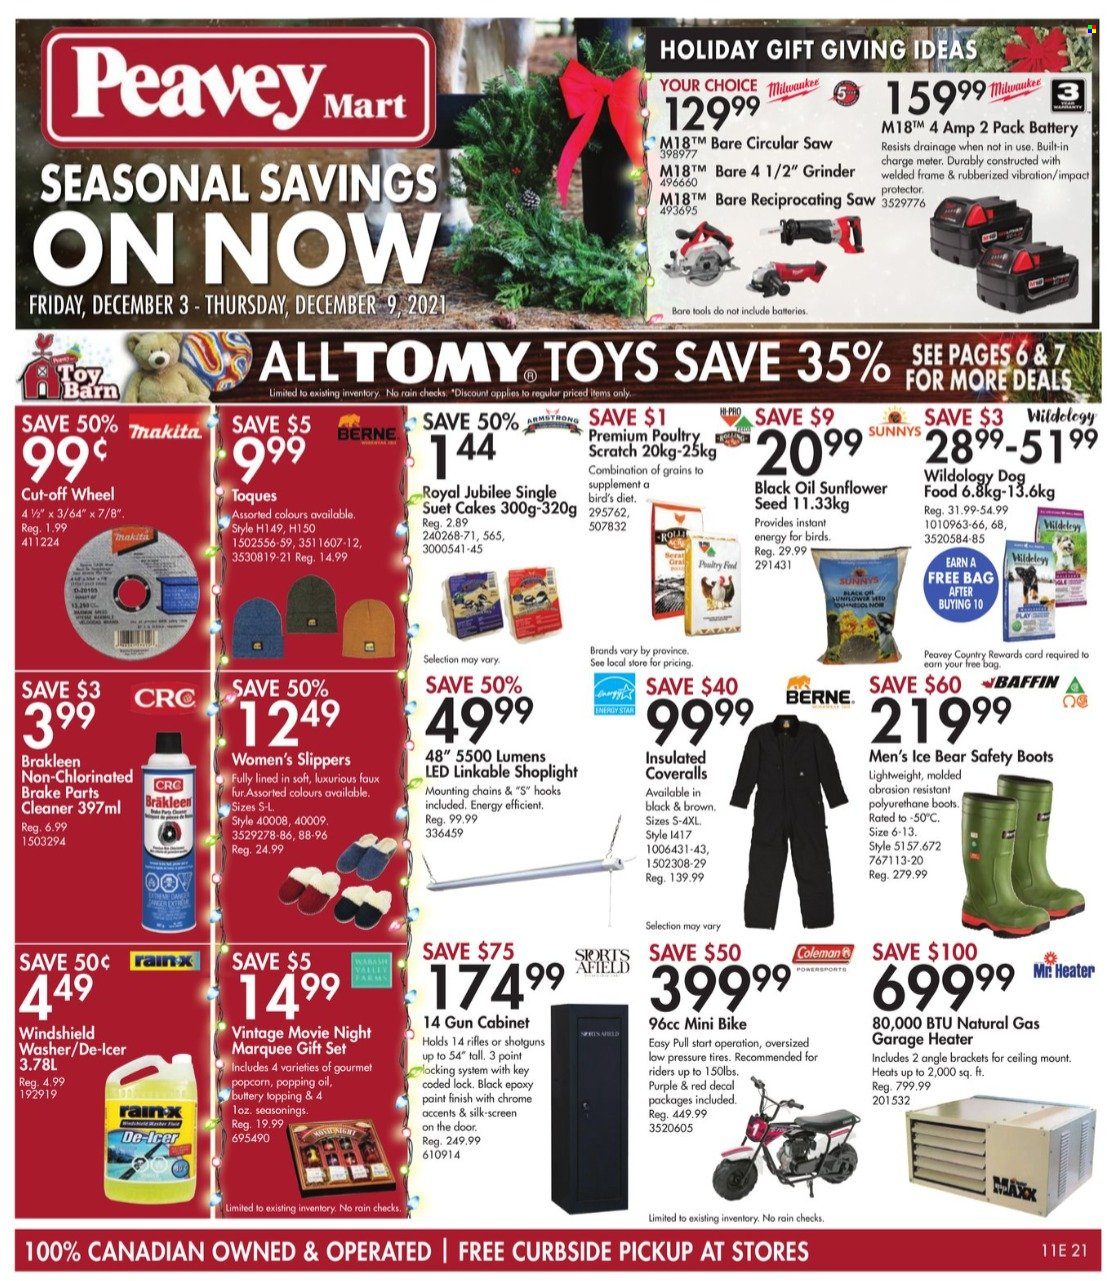 thumbnail - Peavey Mart Flyer - December 03, 2021 - December 09, 2021 - Sales products - animal food, dog food, suet, plant seeds, suet cakes, boots, slippers, Coleman, Makita, grinder, circular saw, saw, reciprocating saw, cabinet, brake cleaner, cleaner, tires. Page 1.